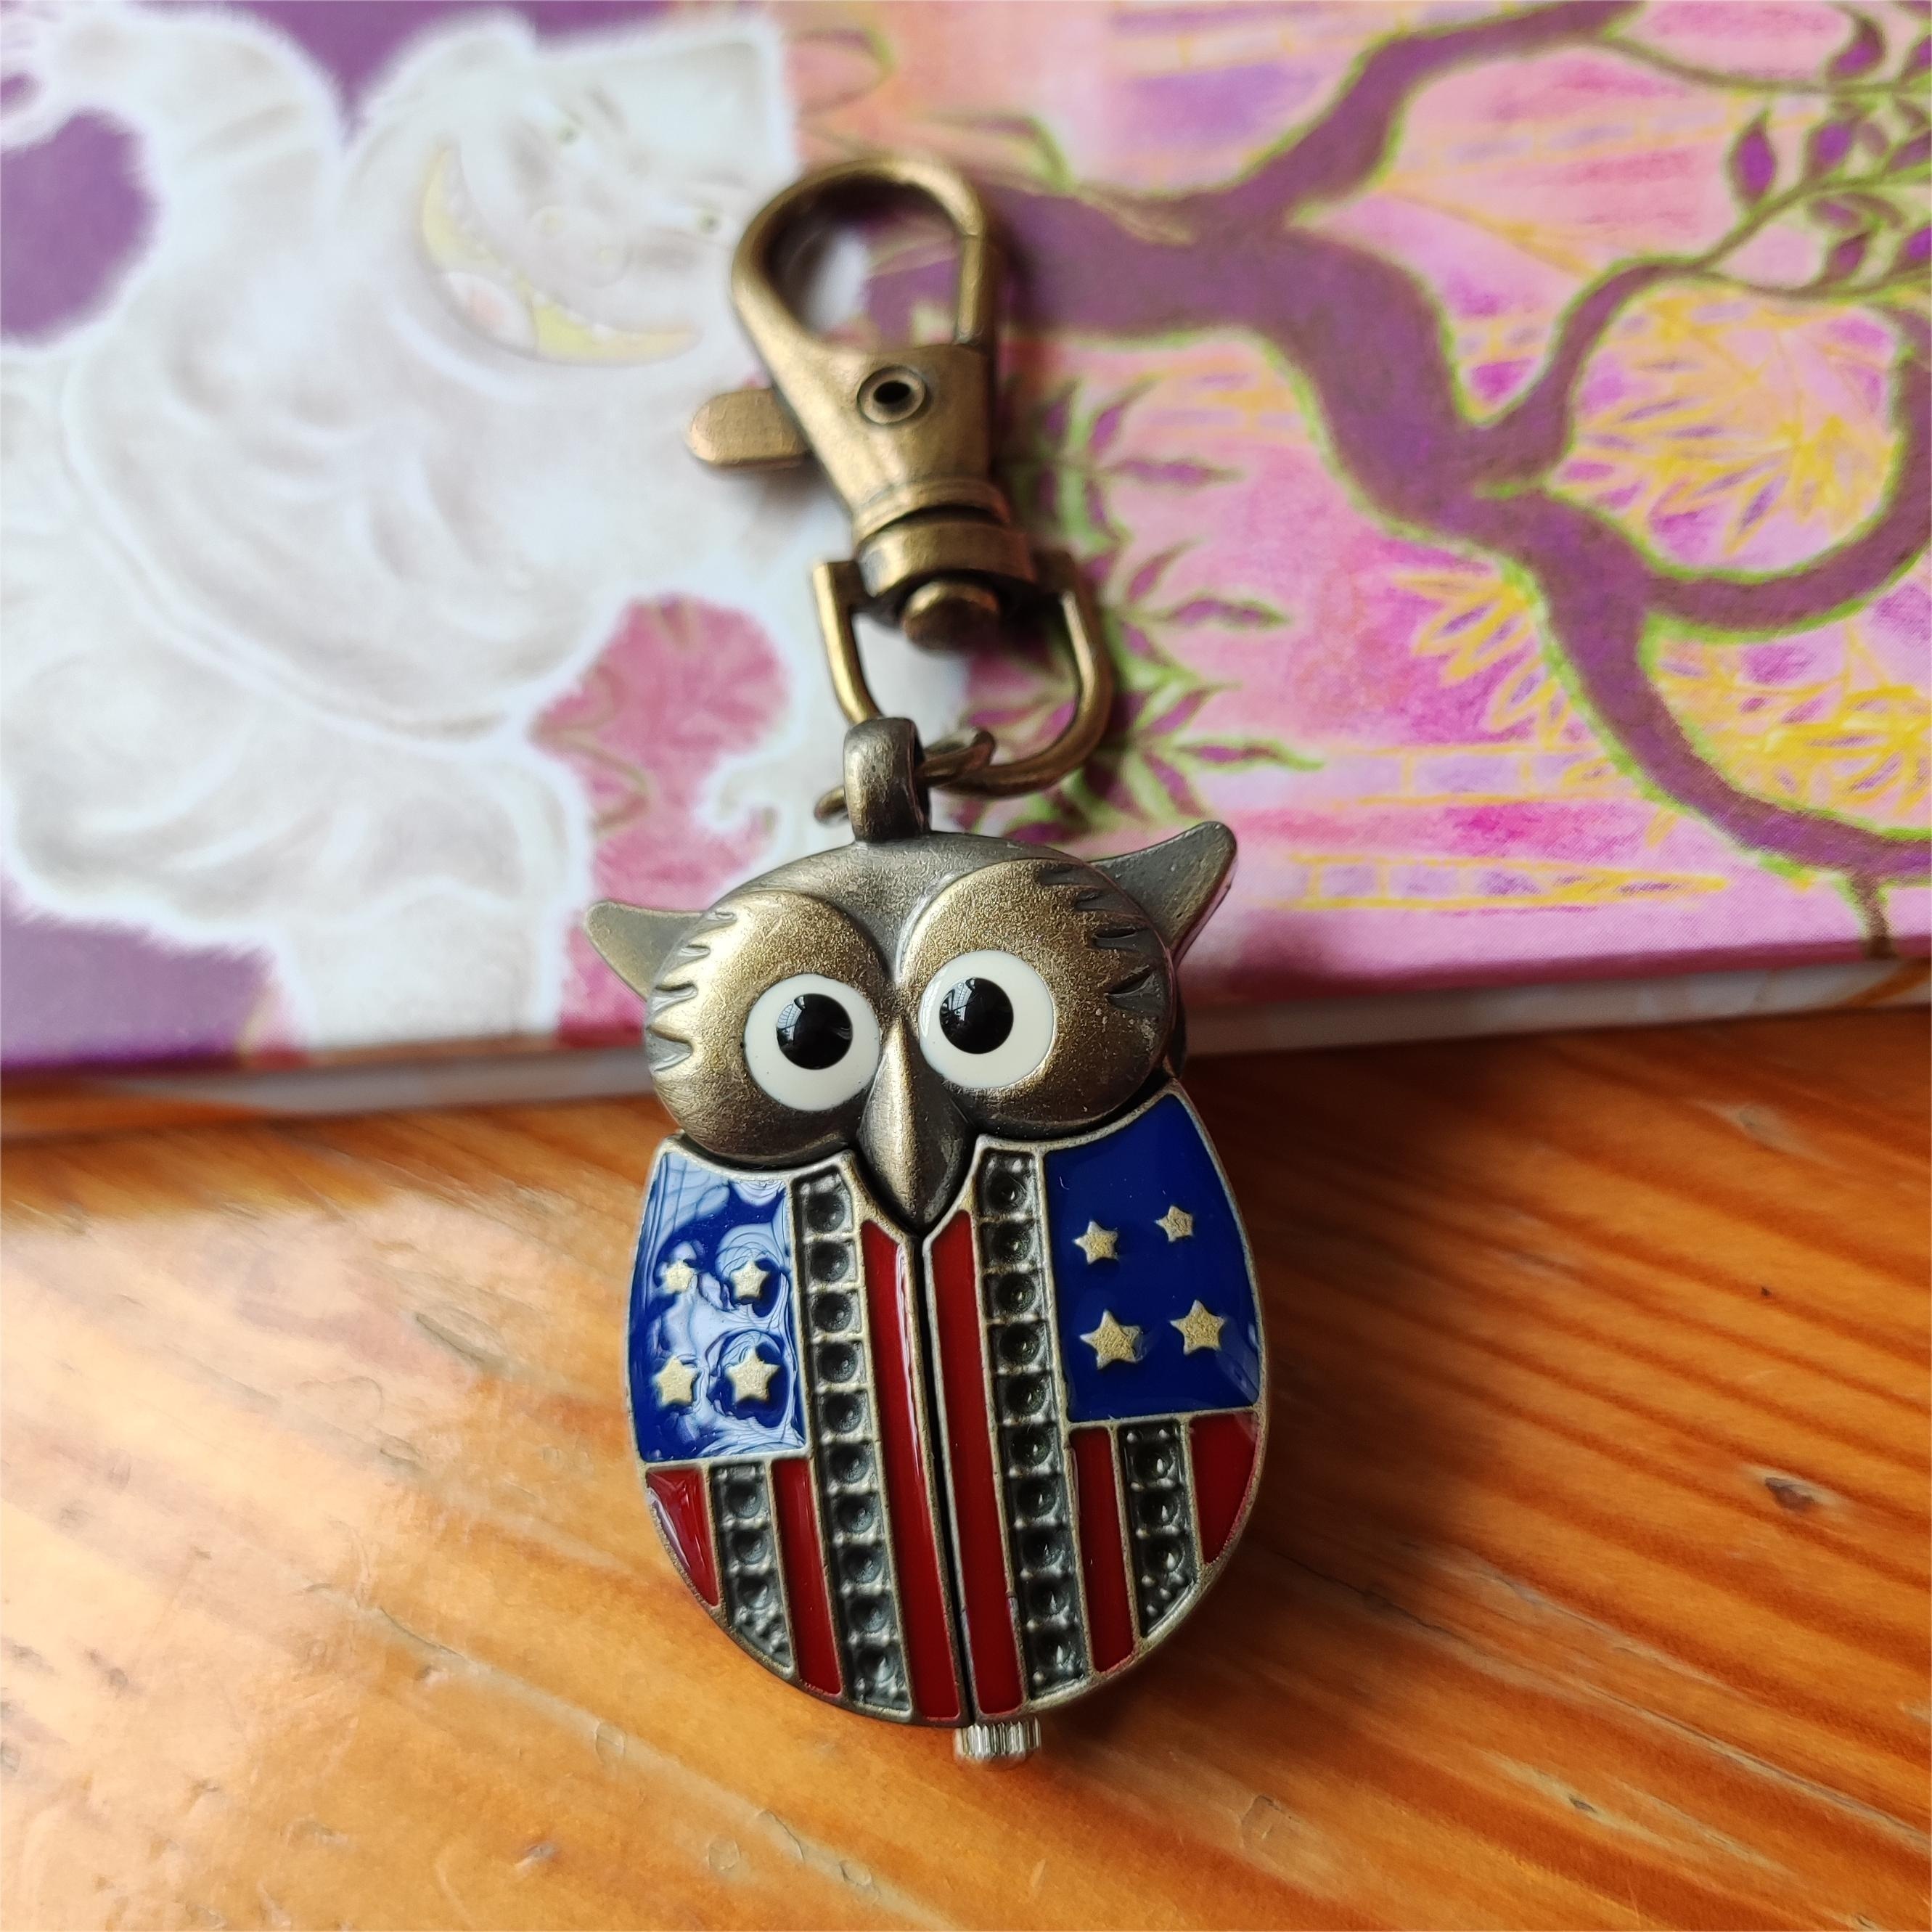 american flag owl quartz pocket watch with clip cute animal nurse watch independence day hanging lapel brooch fob watch bronze 0